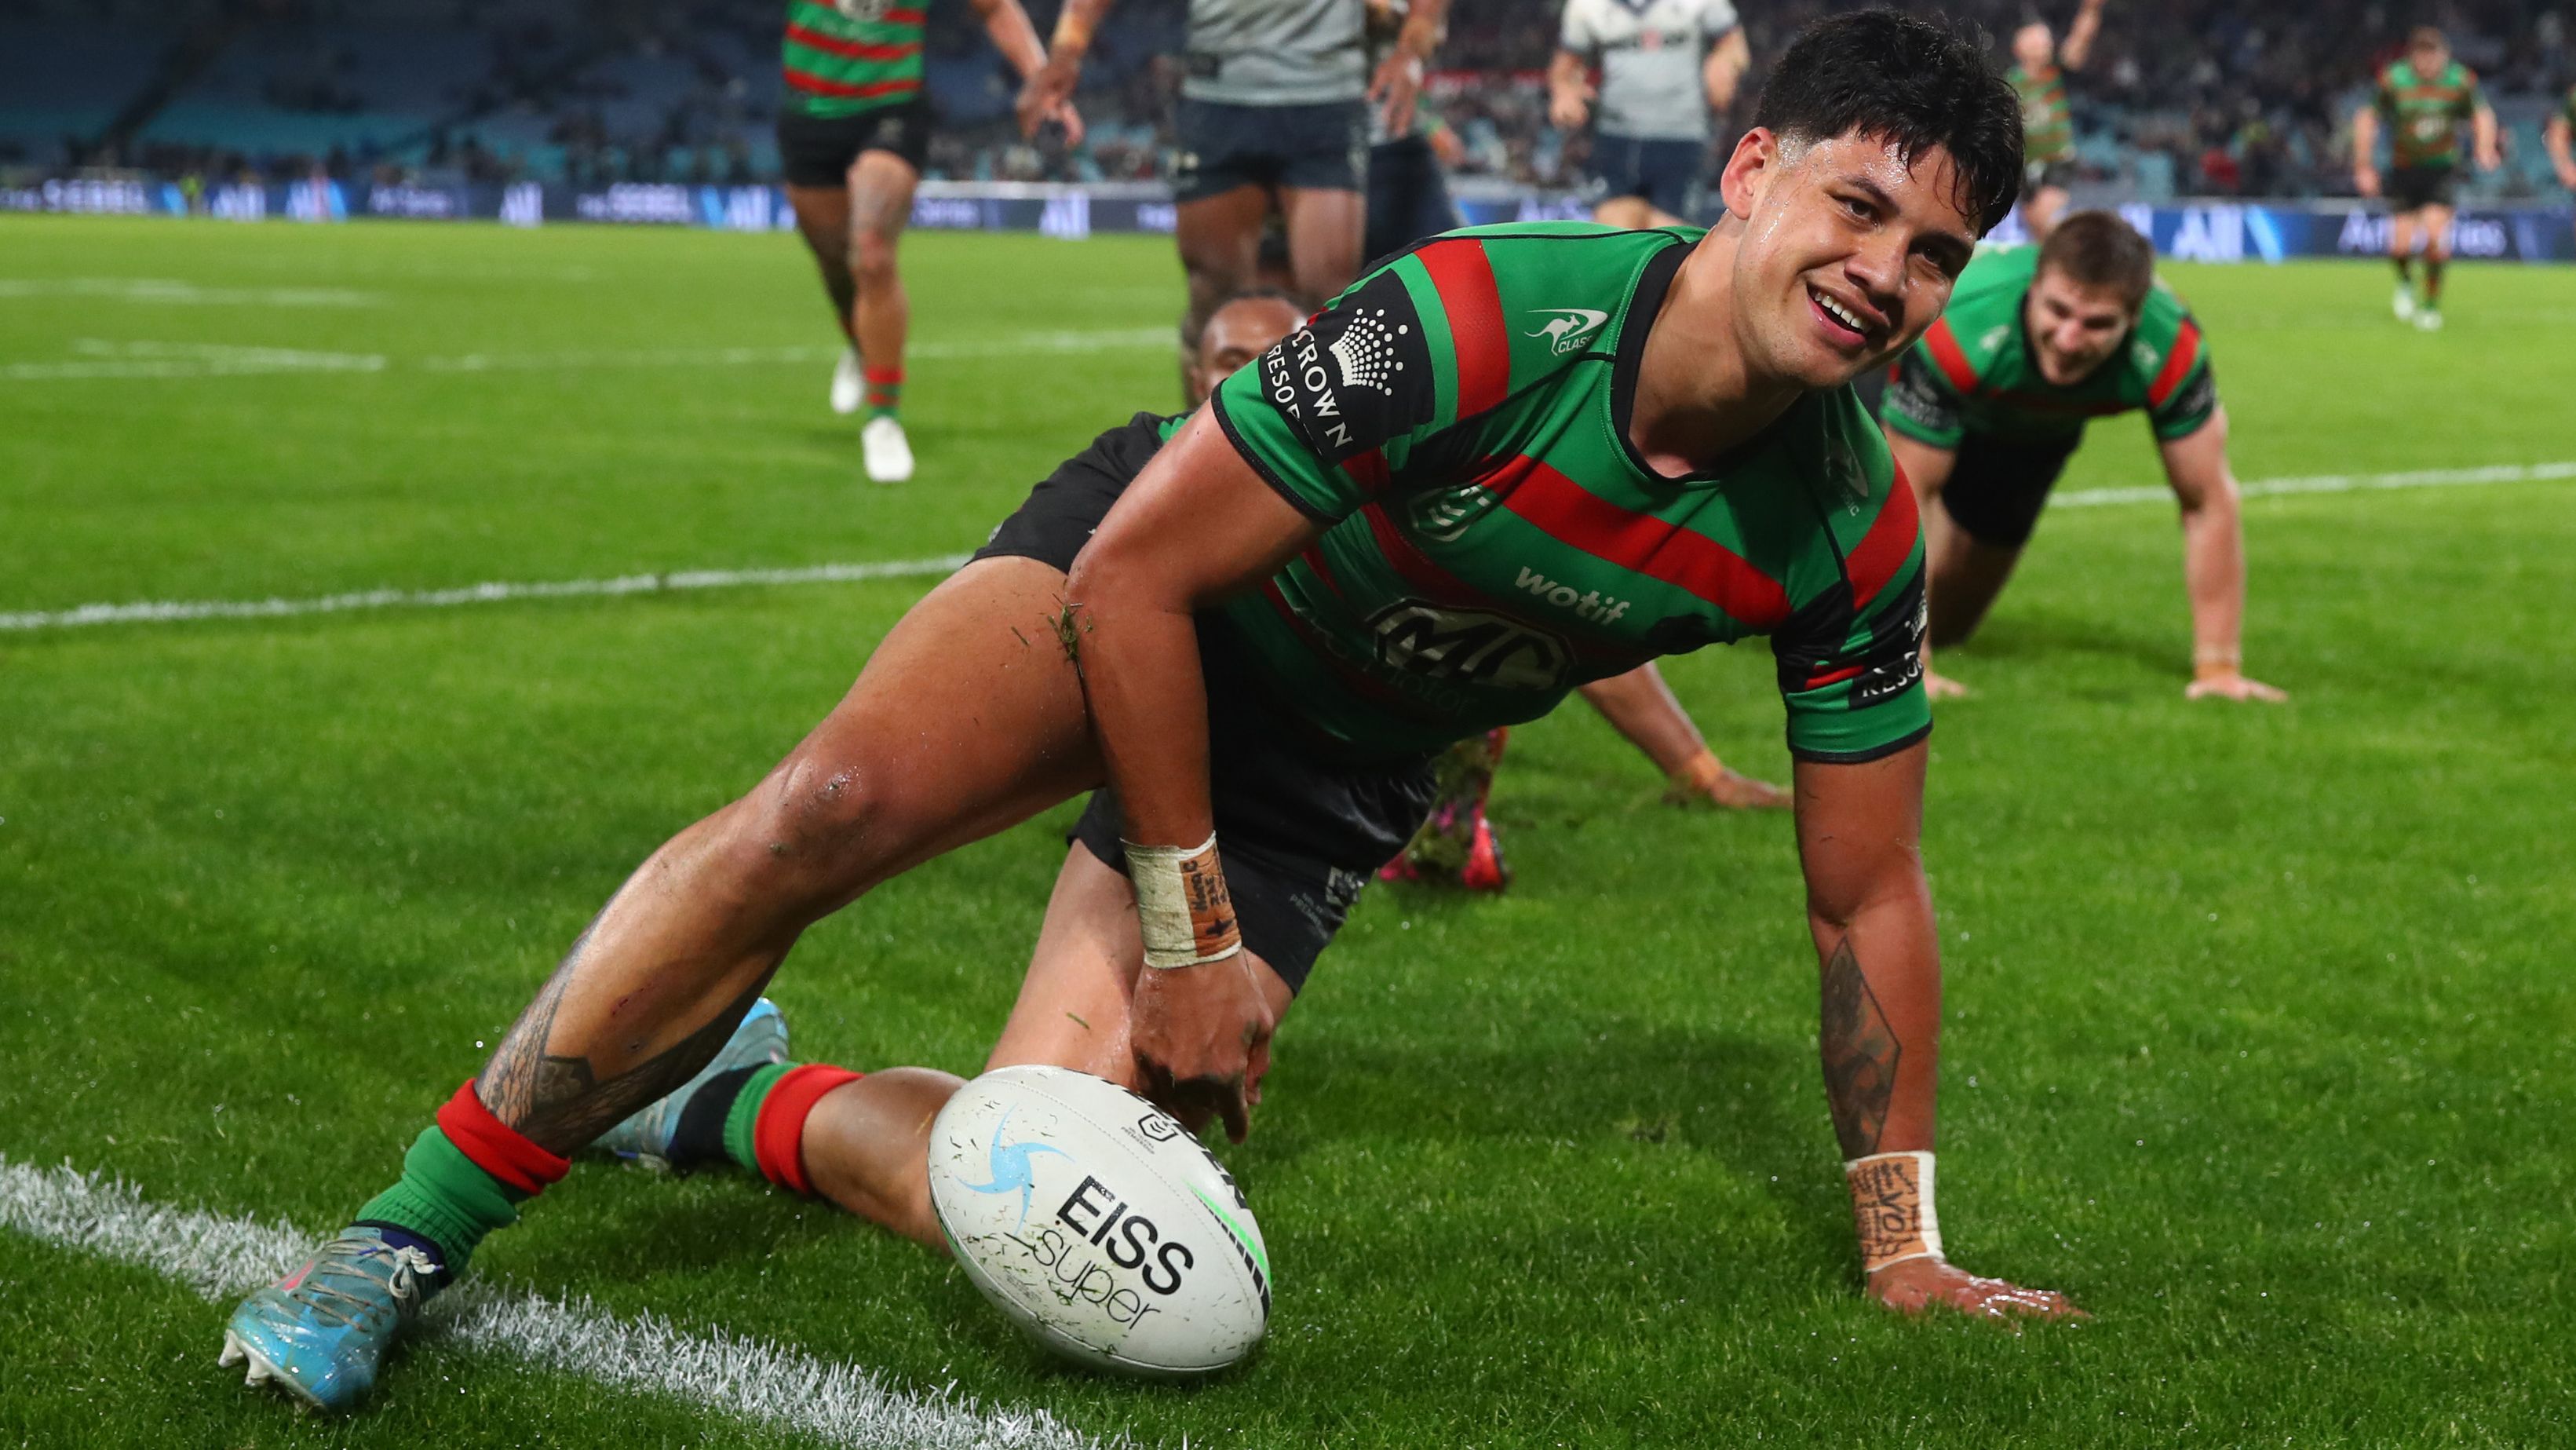 Jaxson Paulo of the Rabbitohs celebrates scoring a try during the round 19 NRL match between the South Sydney Rabbitohs and the Melbourne Storm at Stadium Australia on July 23, 2022 in Sydney, Australia. (Photo by Jason McCawley/Getty Images)